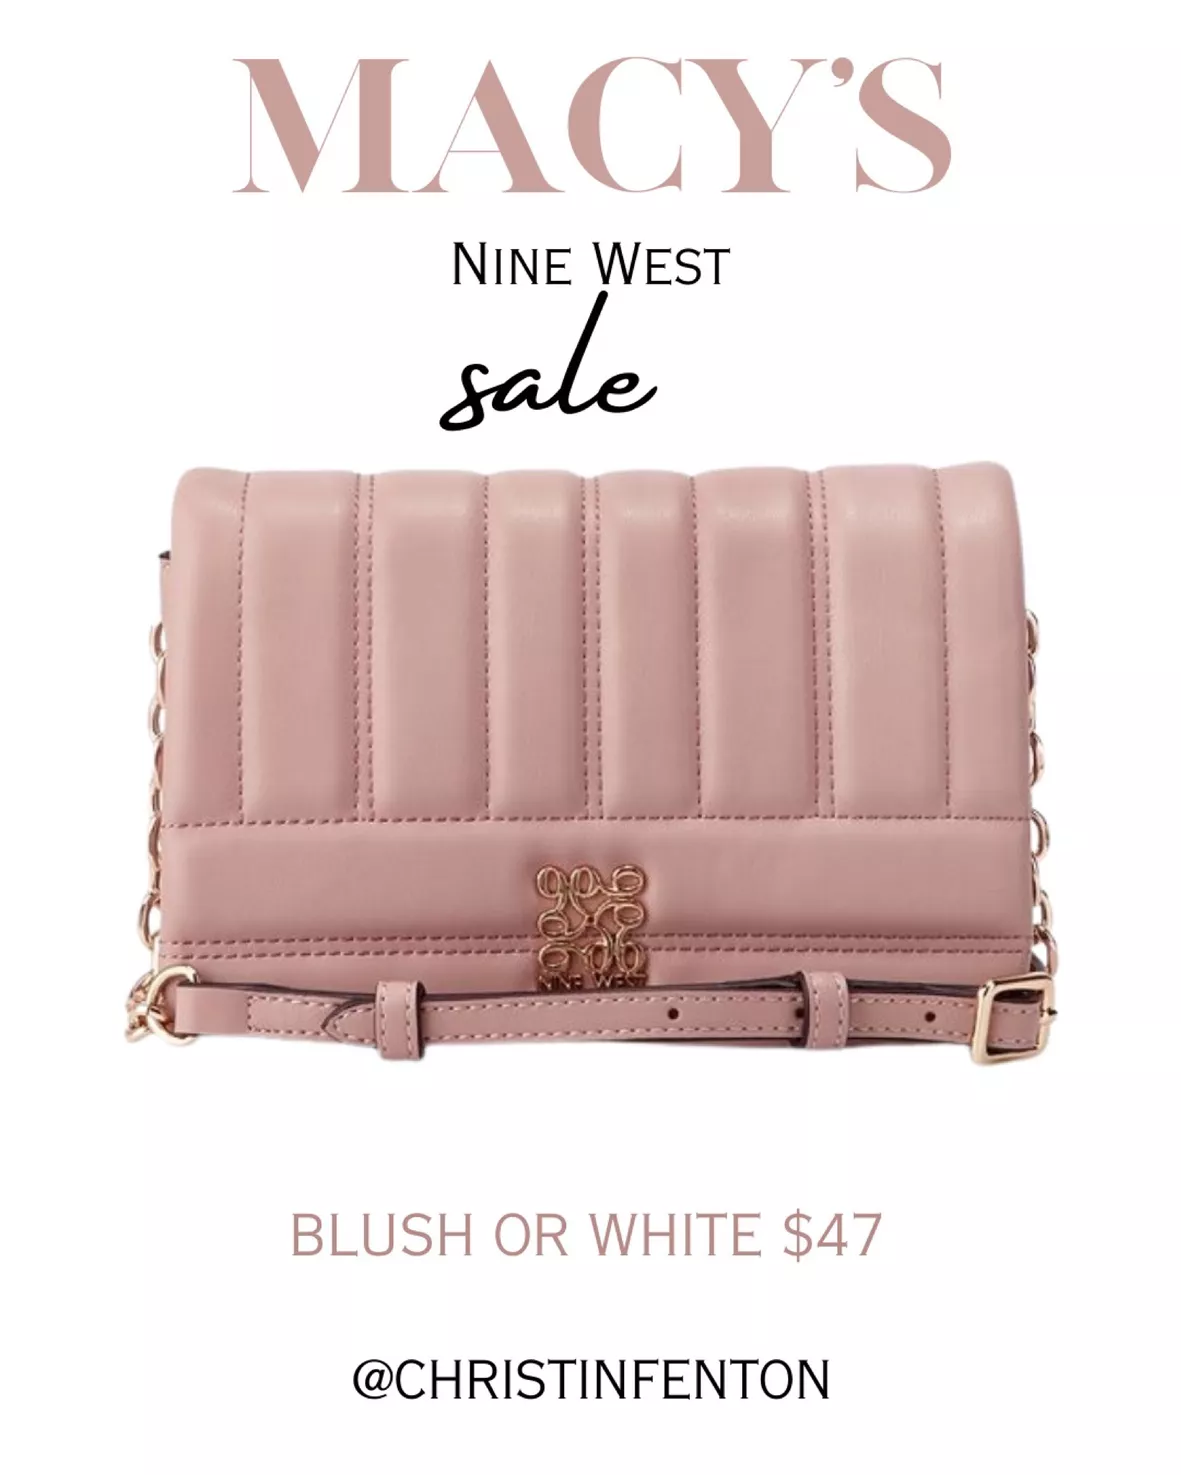 Pink GUESS Handbags, Wallets and Accessories - Macy's